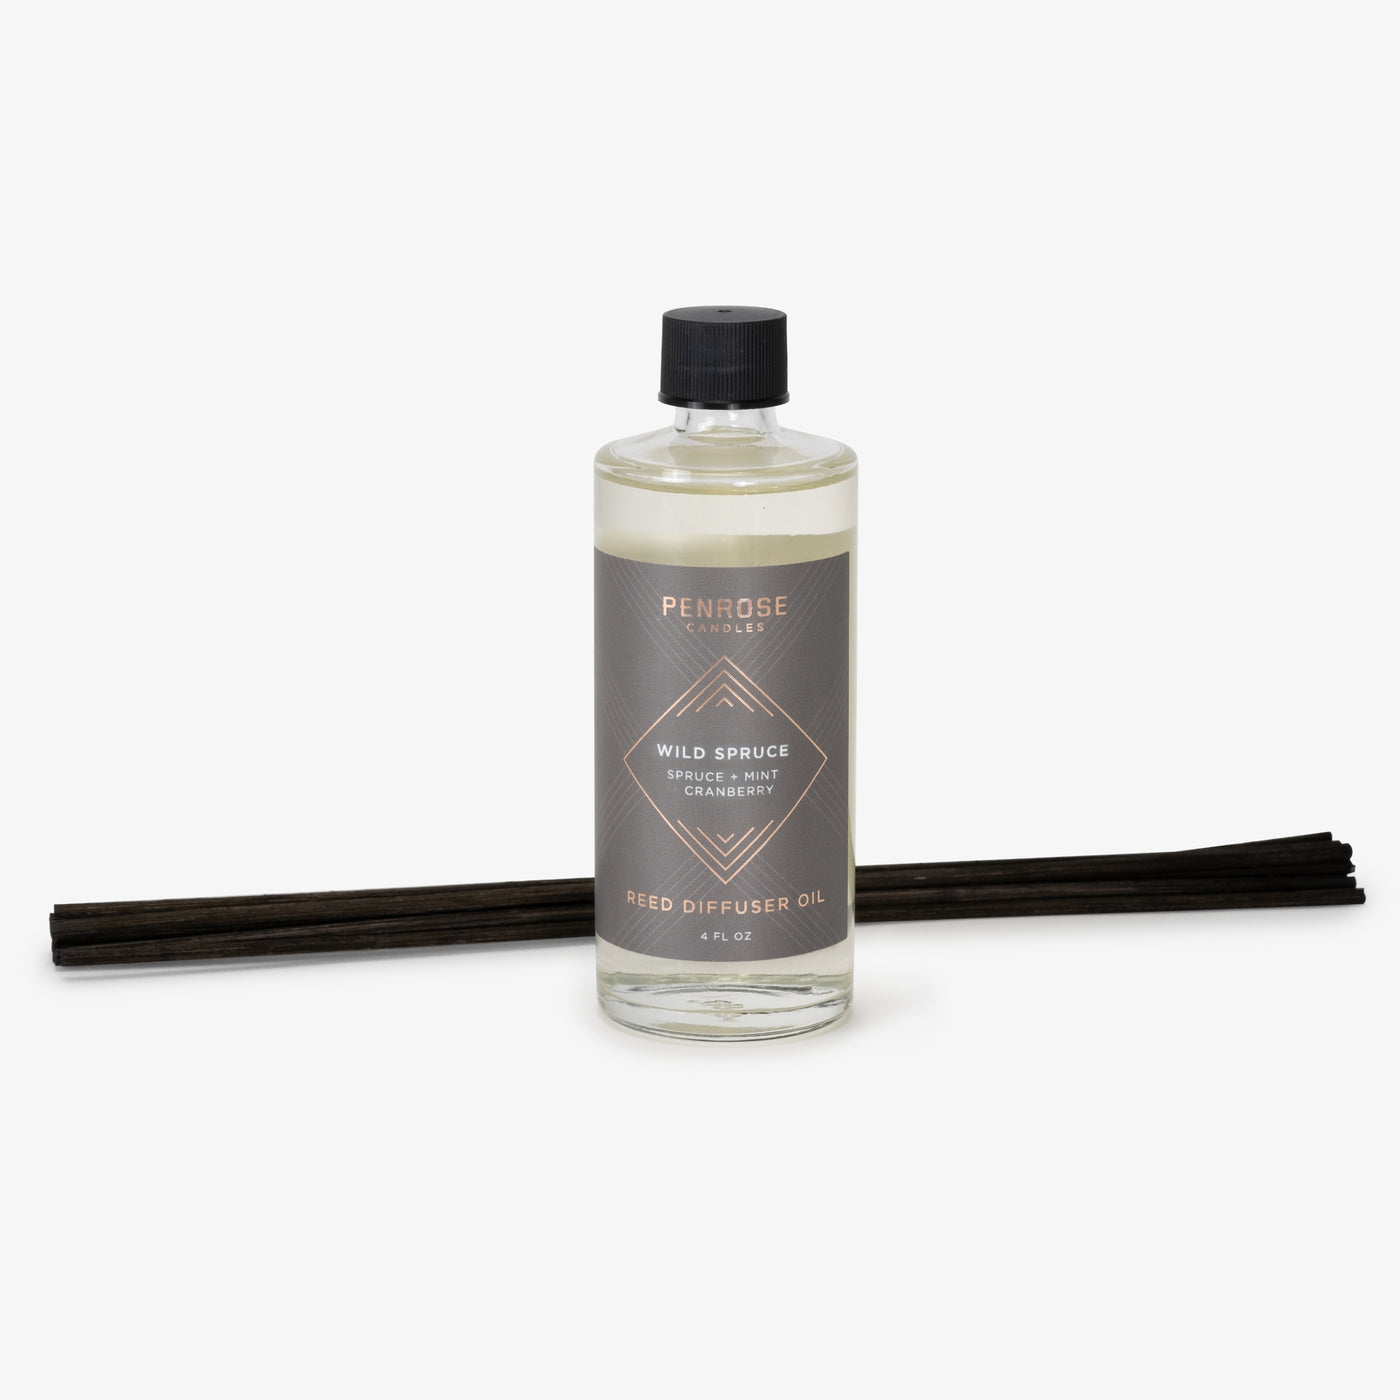 Wild Spruce Reed Diffuser Oil (Refill)